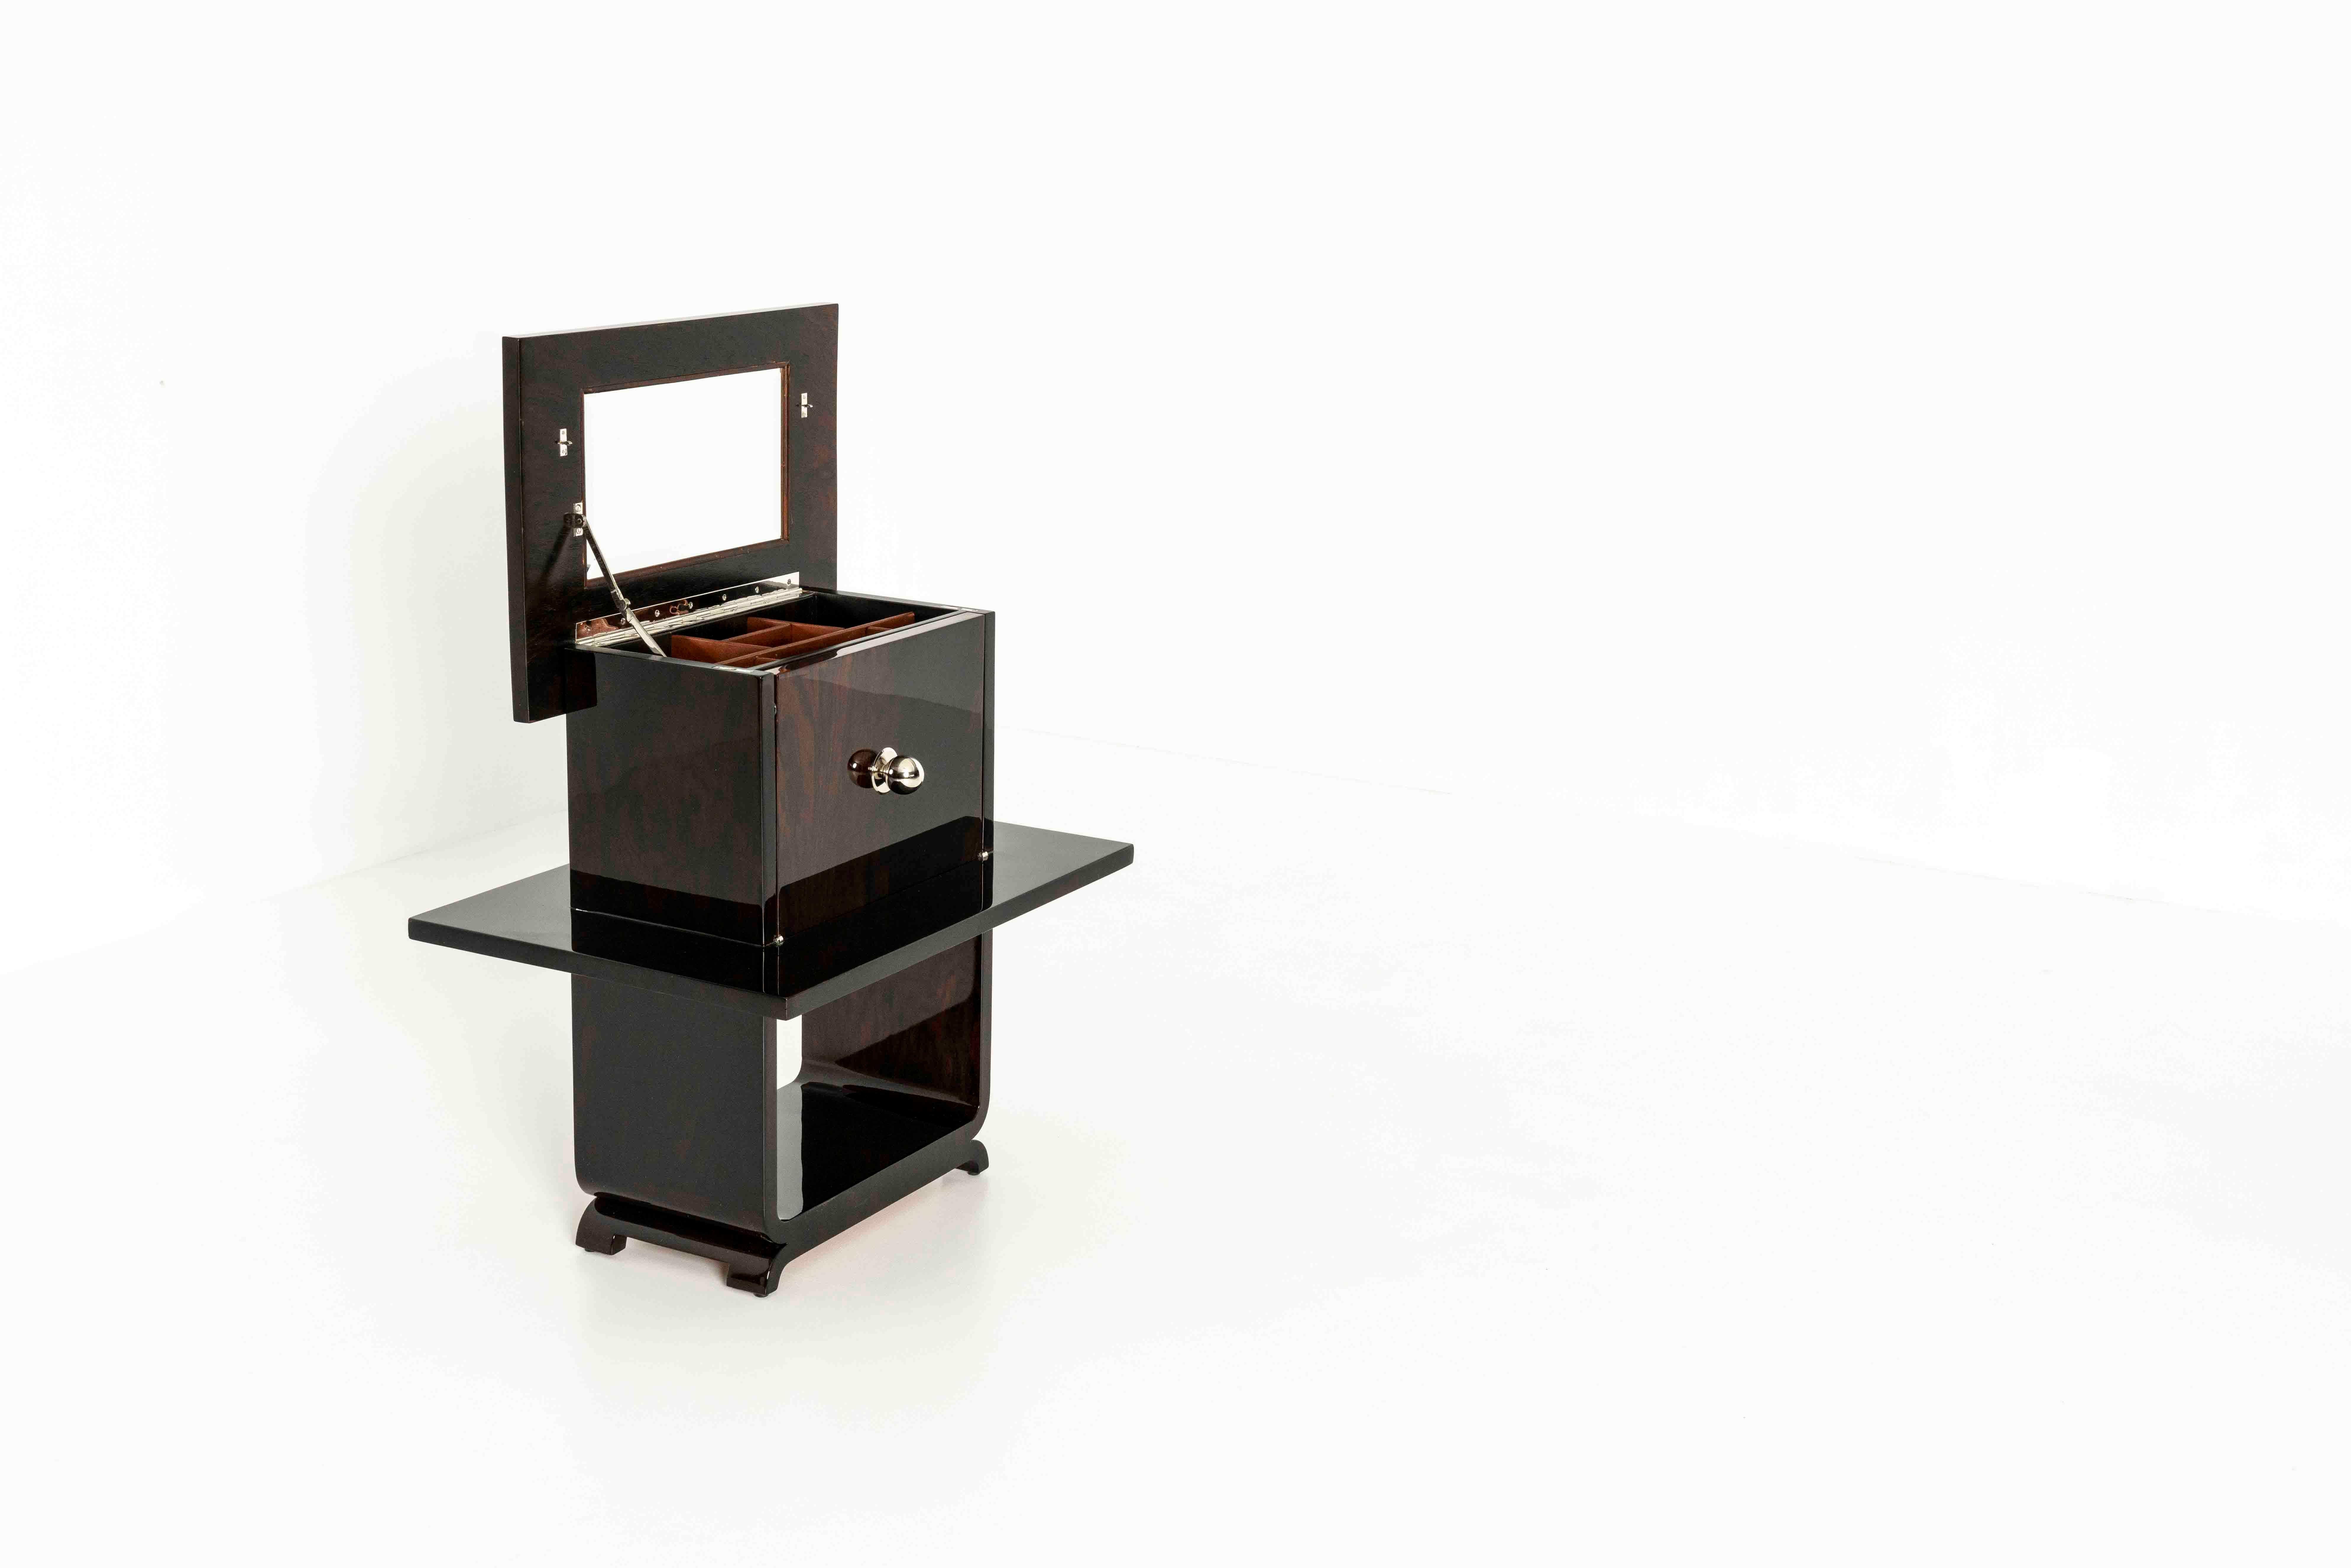 A beautiful piano lacquered bedside table or vanity cabinet. This piece has some nice surprises to it. The top opens leading to a mirror and a box for jewelry. The front panel covers two drawers. Where the back panel has a 'fake knob' for